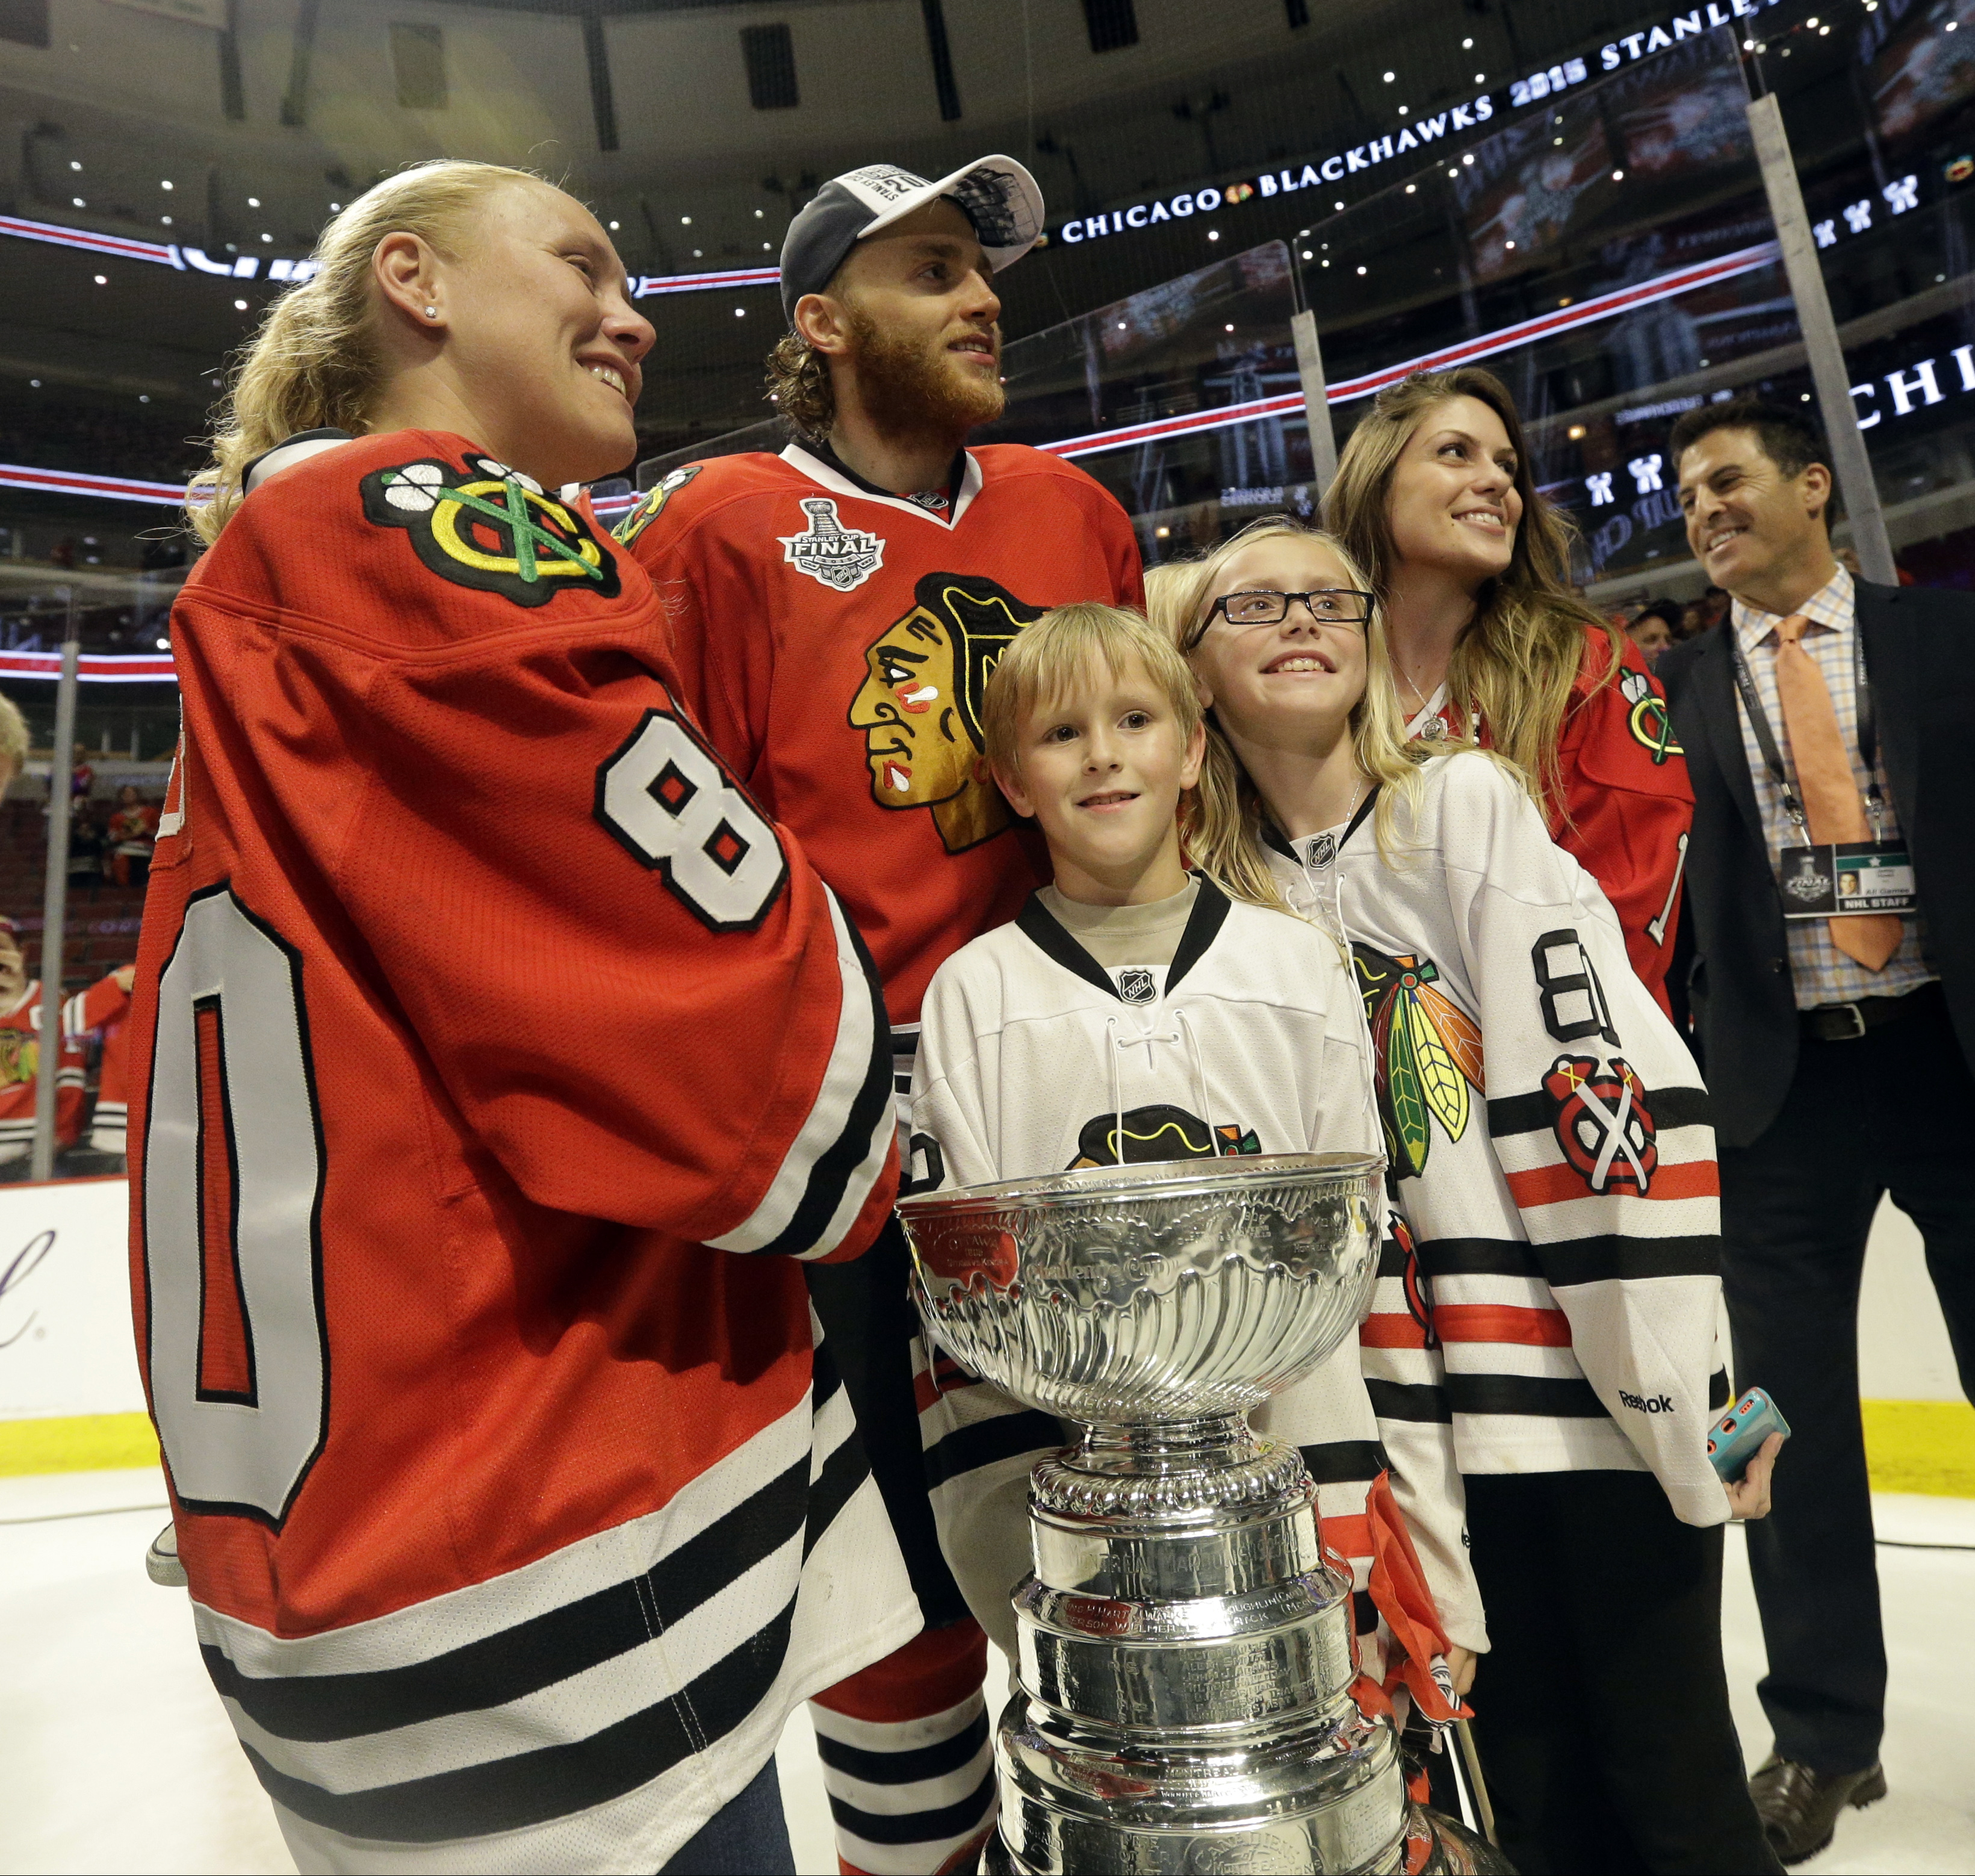 ANY NAME AND NUMBER CHICAGO BLACKHAWKS 2015 STANLEY CUP FINALS